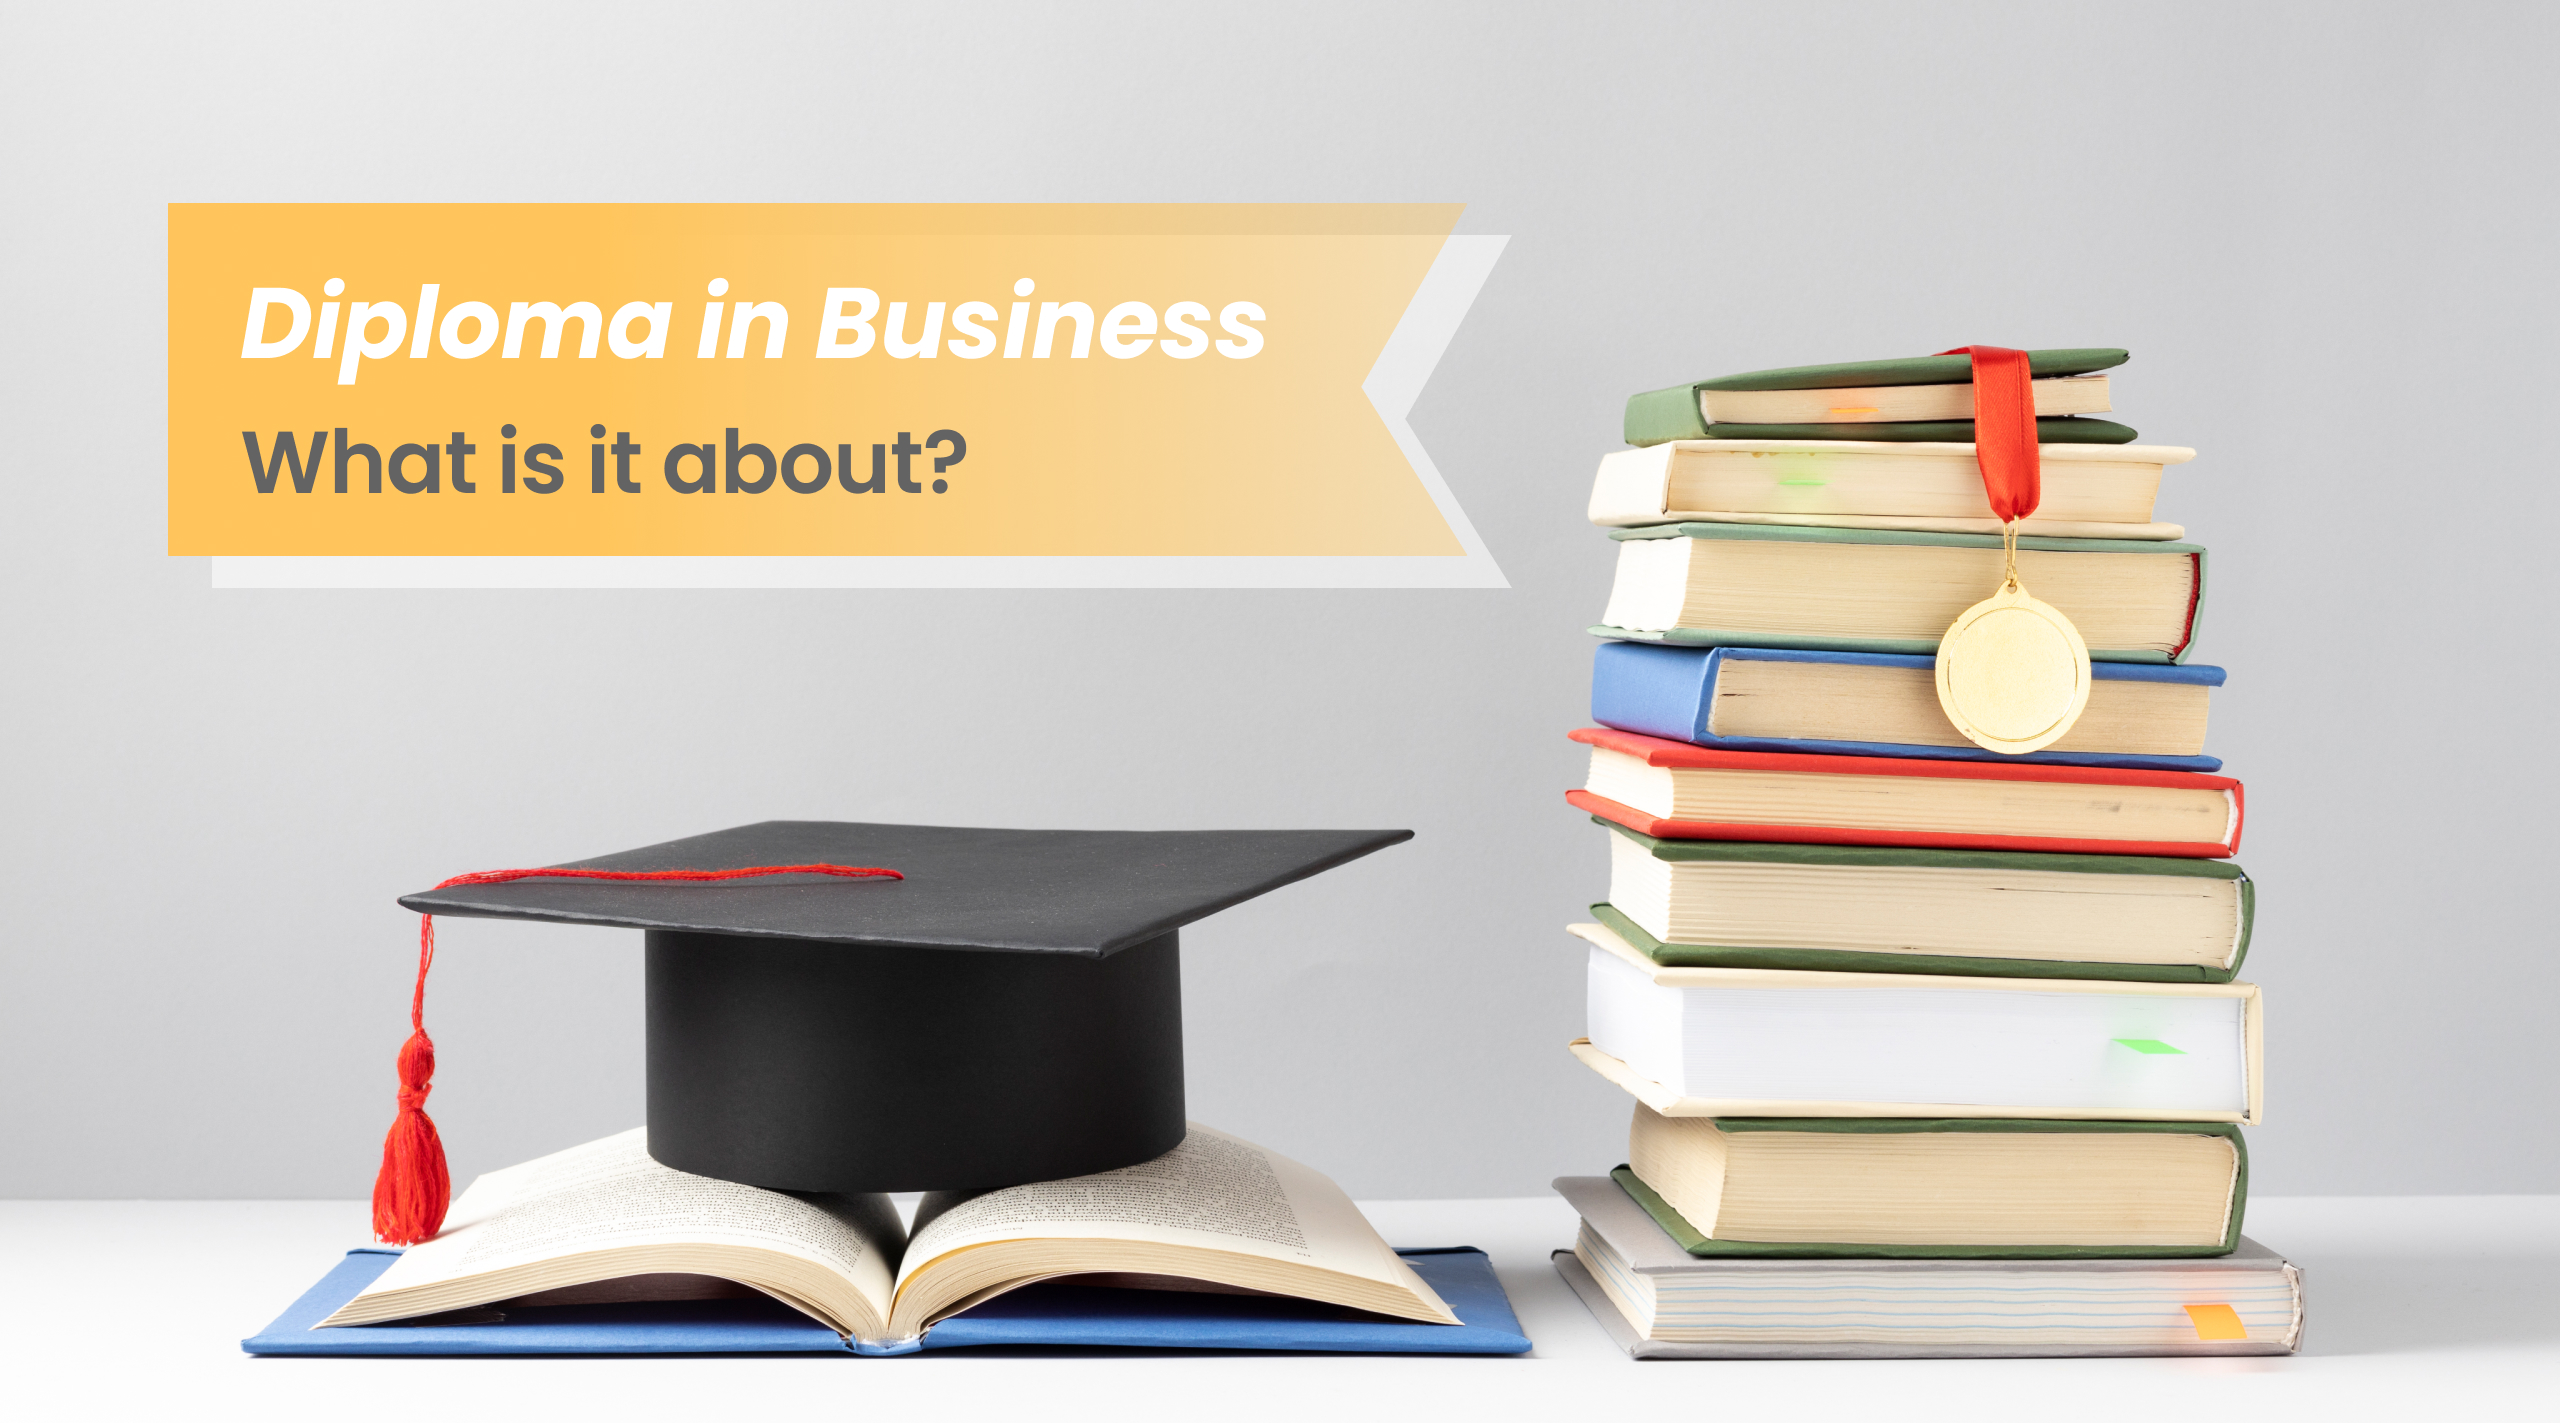 Diploma in Business: What is it about?